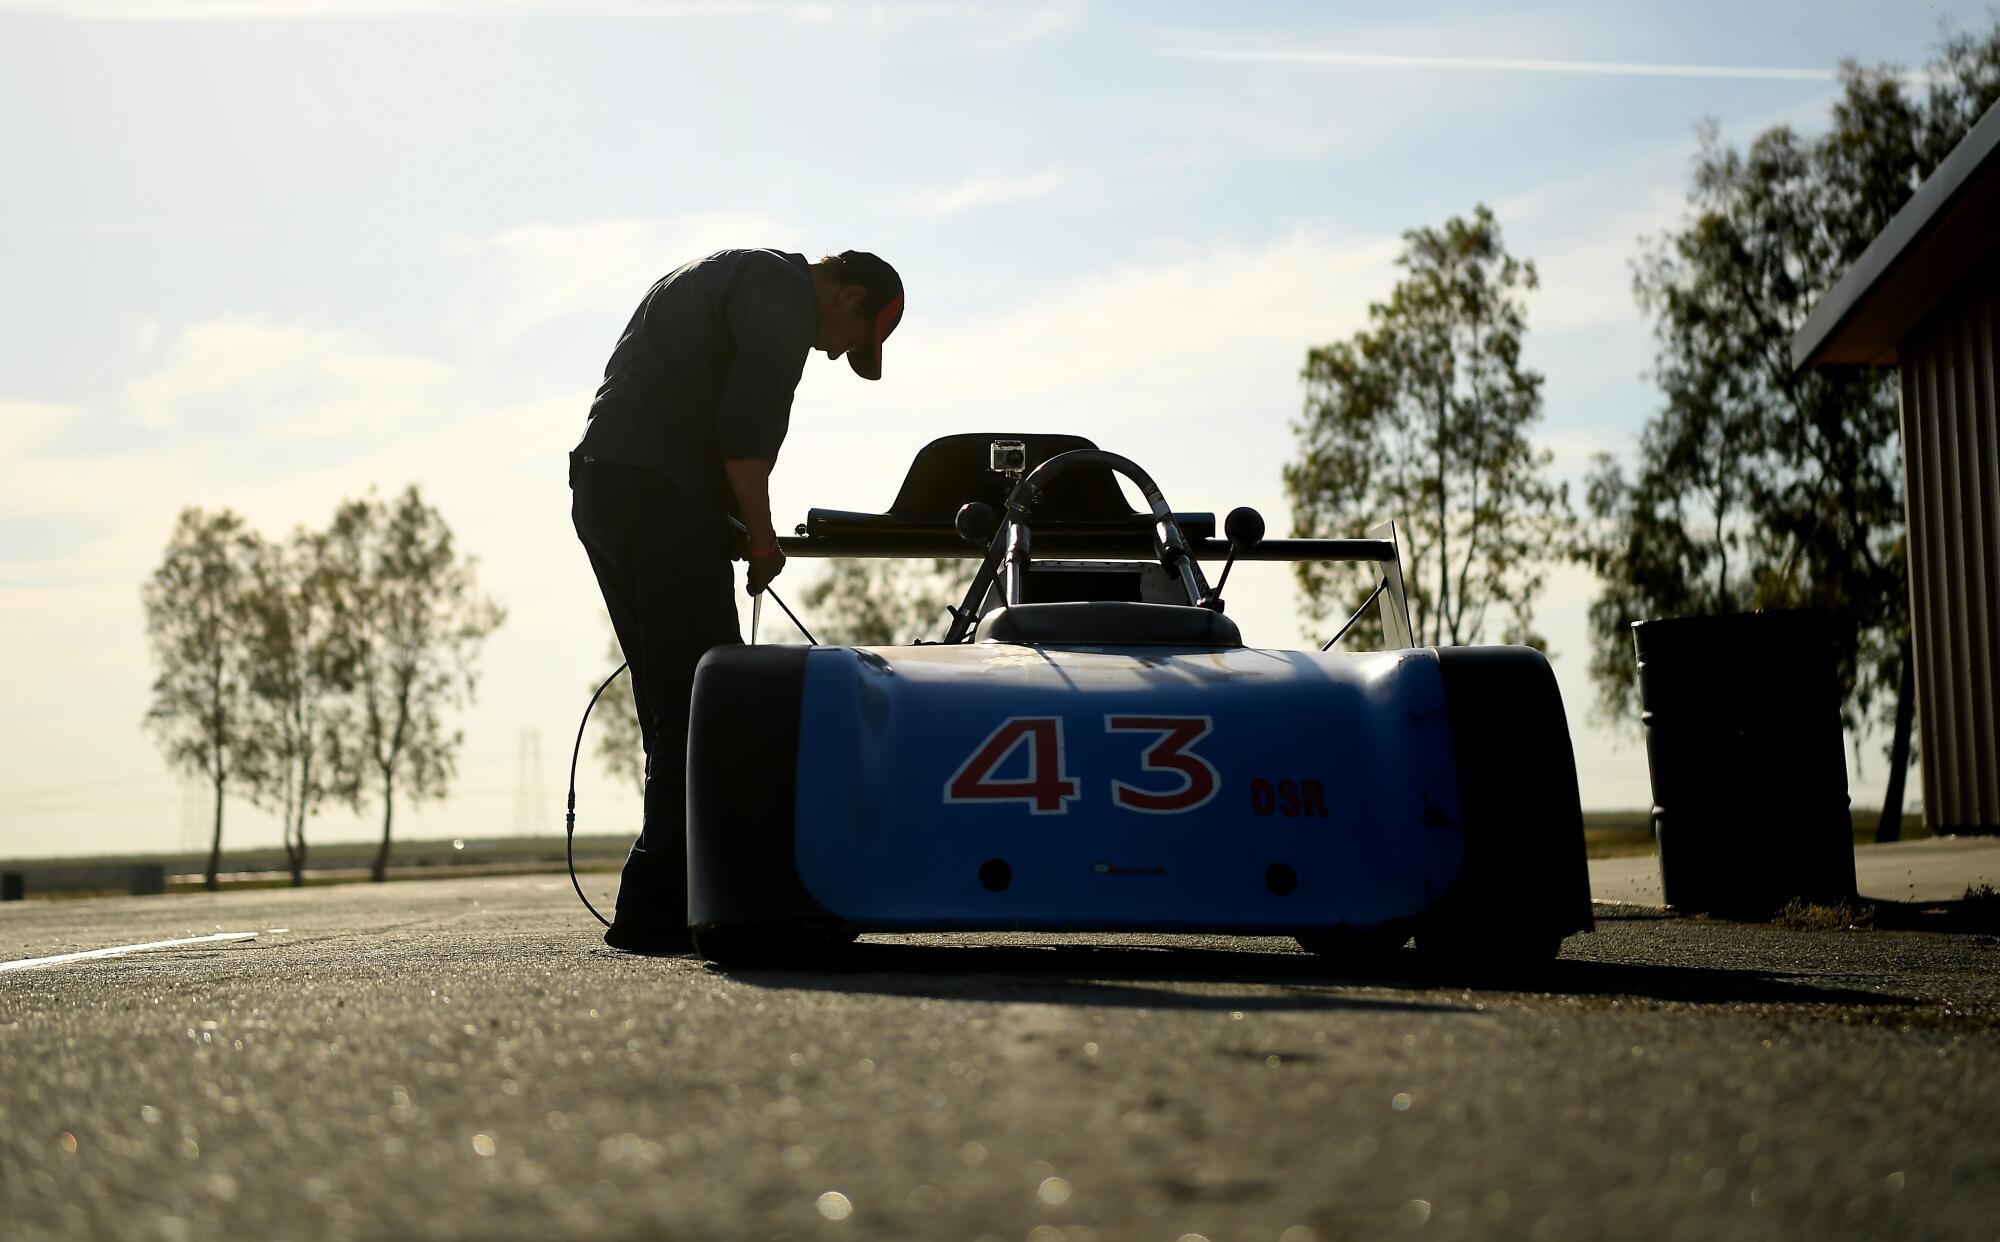 James Kuhns, 78, who has been racing since 1968, prepares his car before a race at Buttonwillow Raceway in Buttonwillow, Calif., on Saturday.